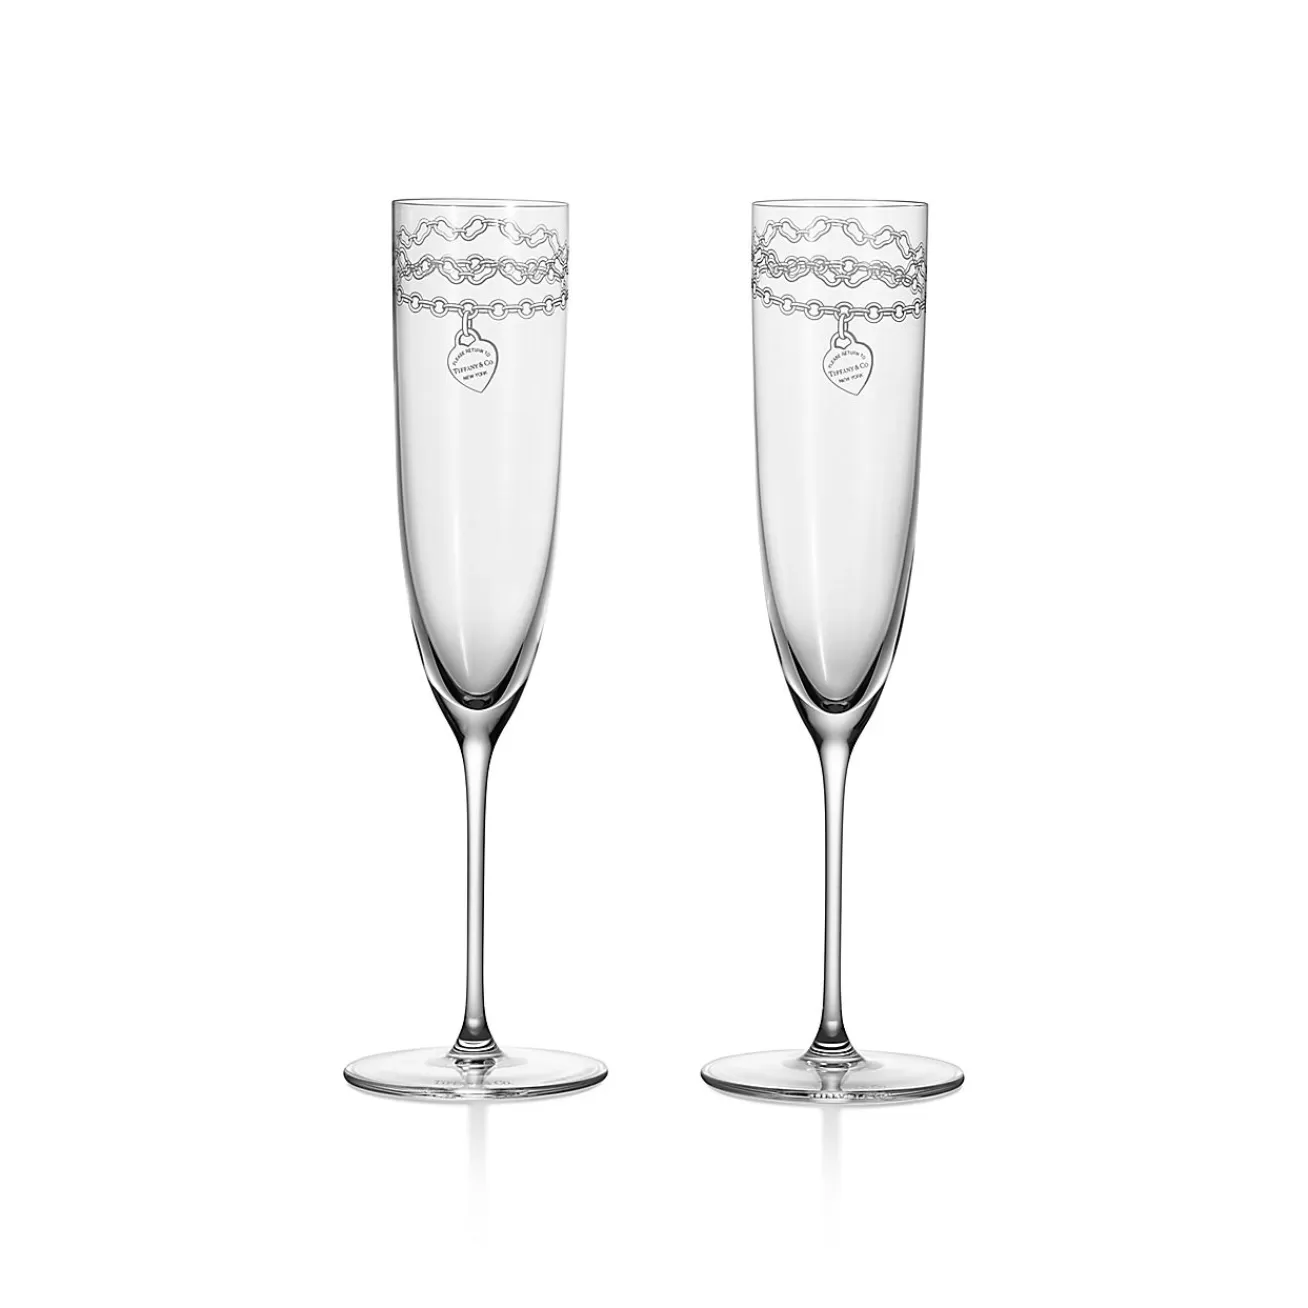 Tiffany & Co. Return to Tiffany® Etched Champagne Glasses Set of Two, in Crystal Glass | ^ The Home | Housewarming Gifts